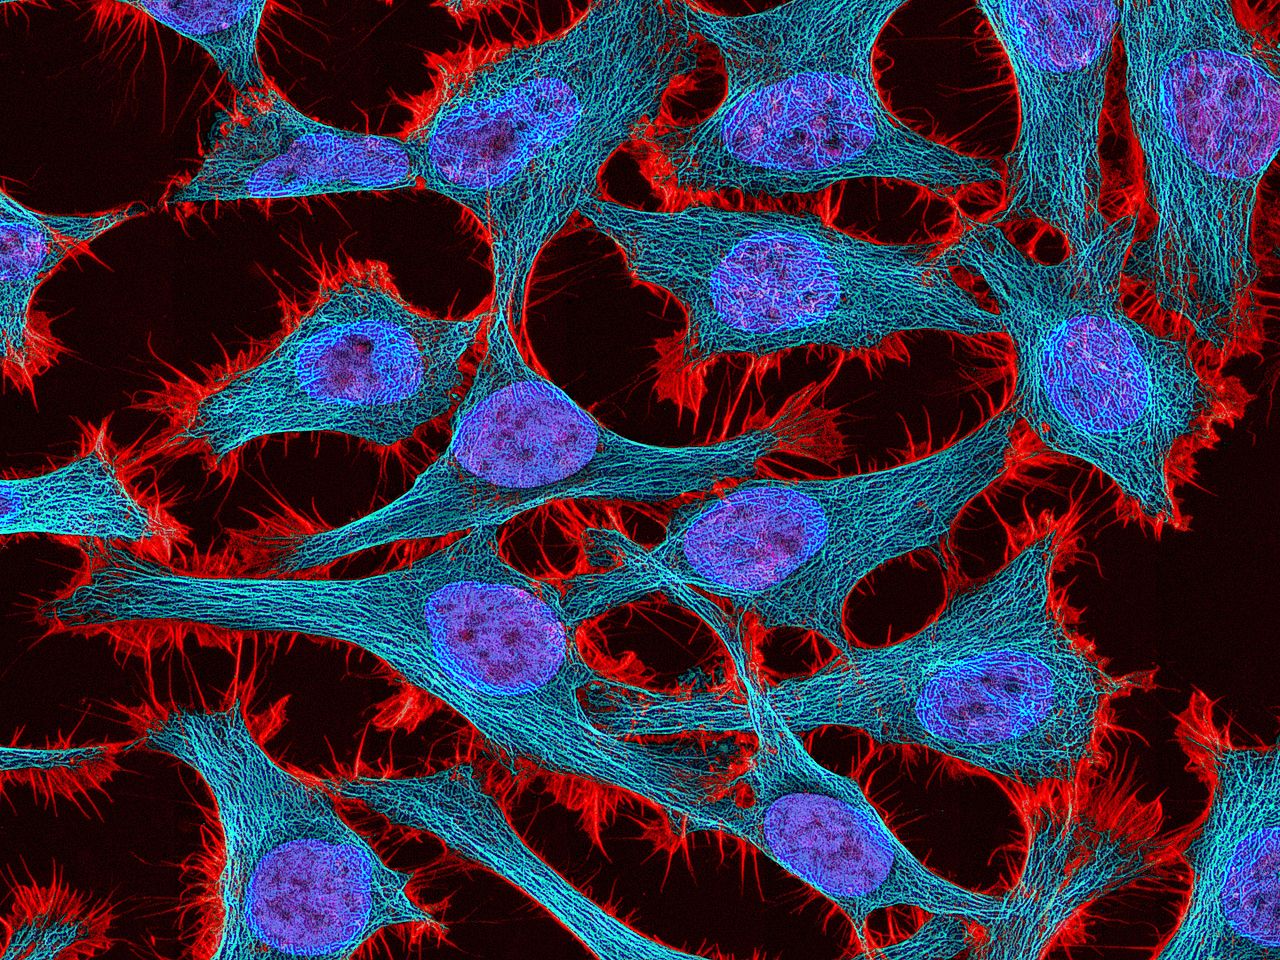 HeLa cells stained with the actin binding toxin phalloidin (red), microtubules (cyan) and cell nuclei (blue). Source: NIH [public domain]